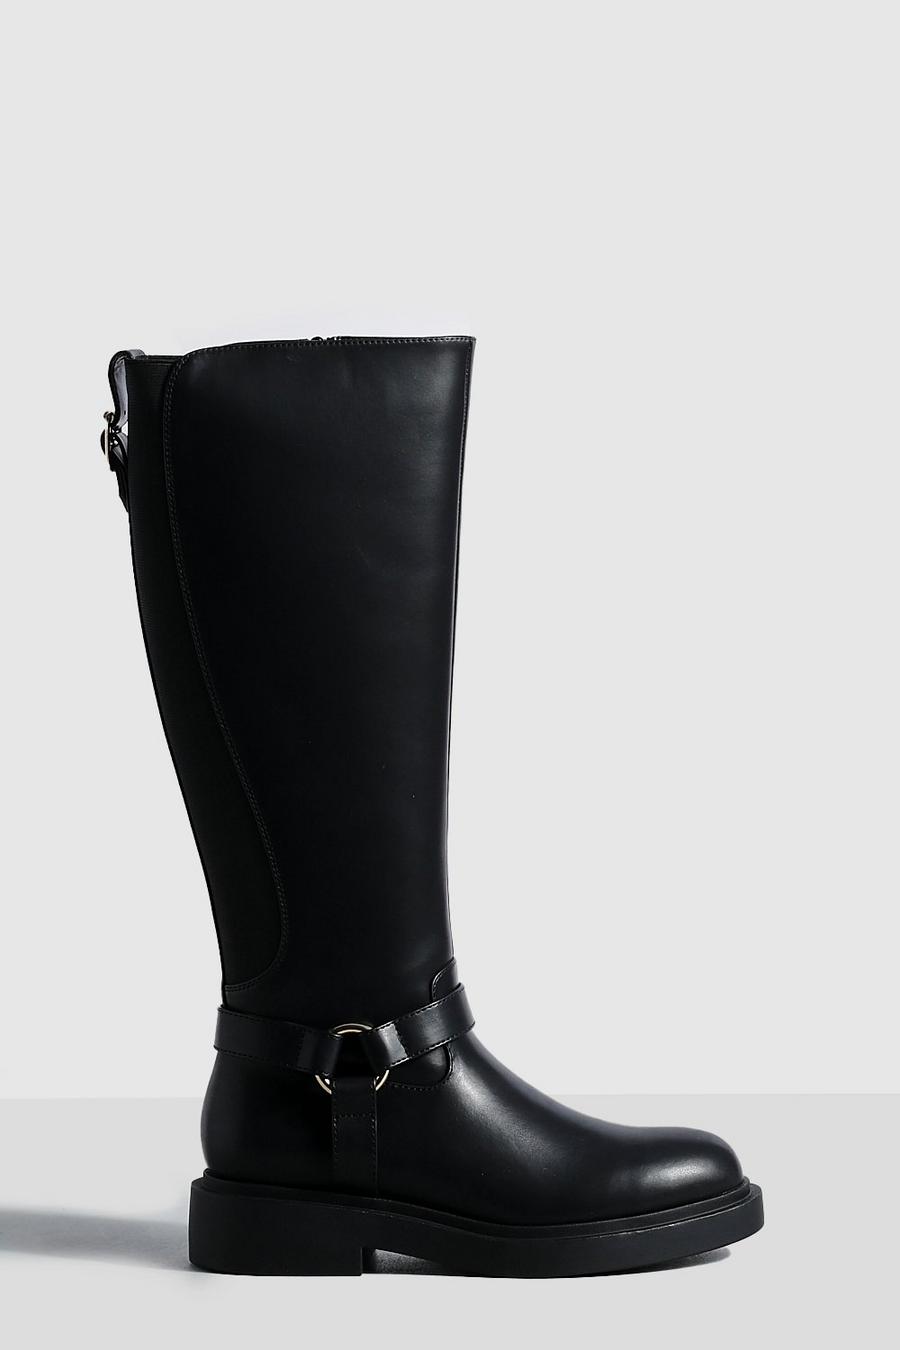 Black Hardware Detail Chunky Knee High Boots